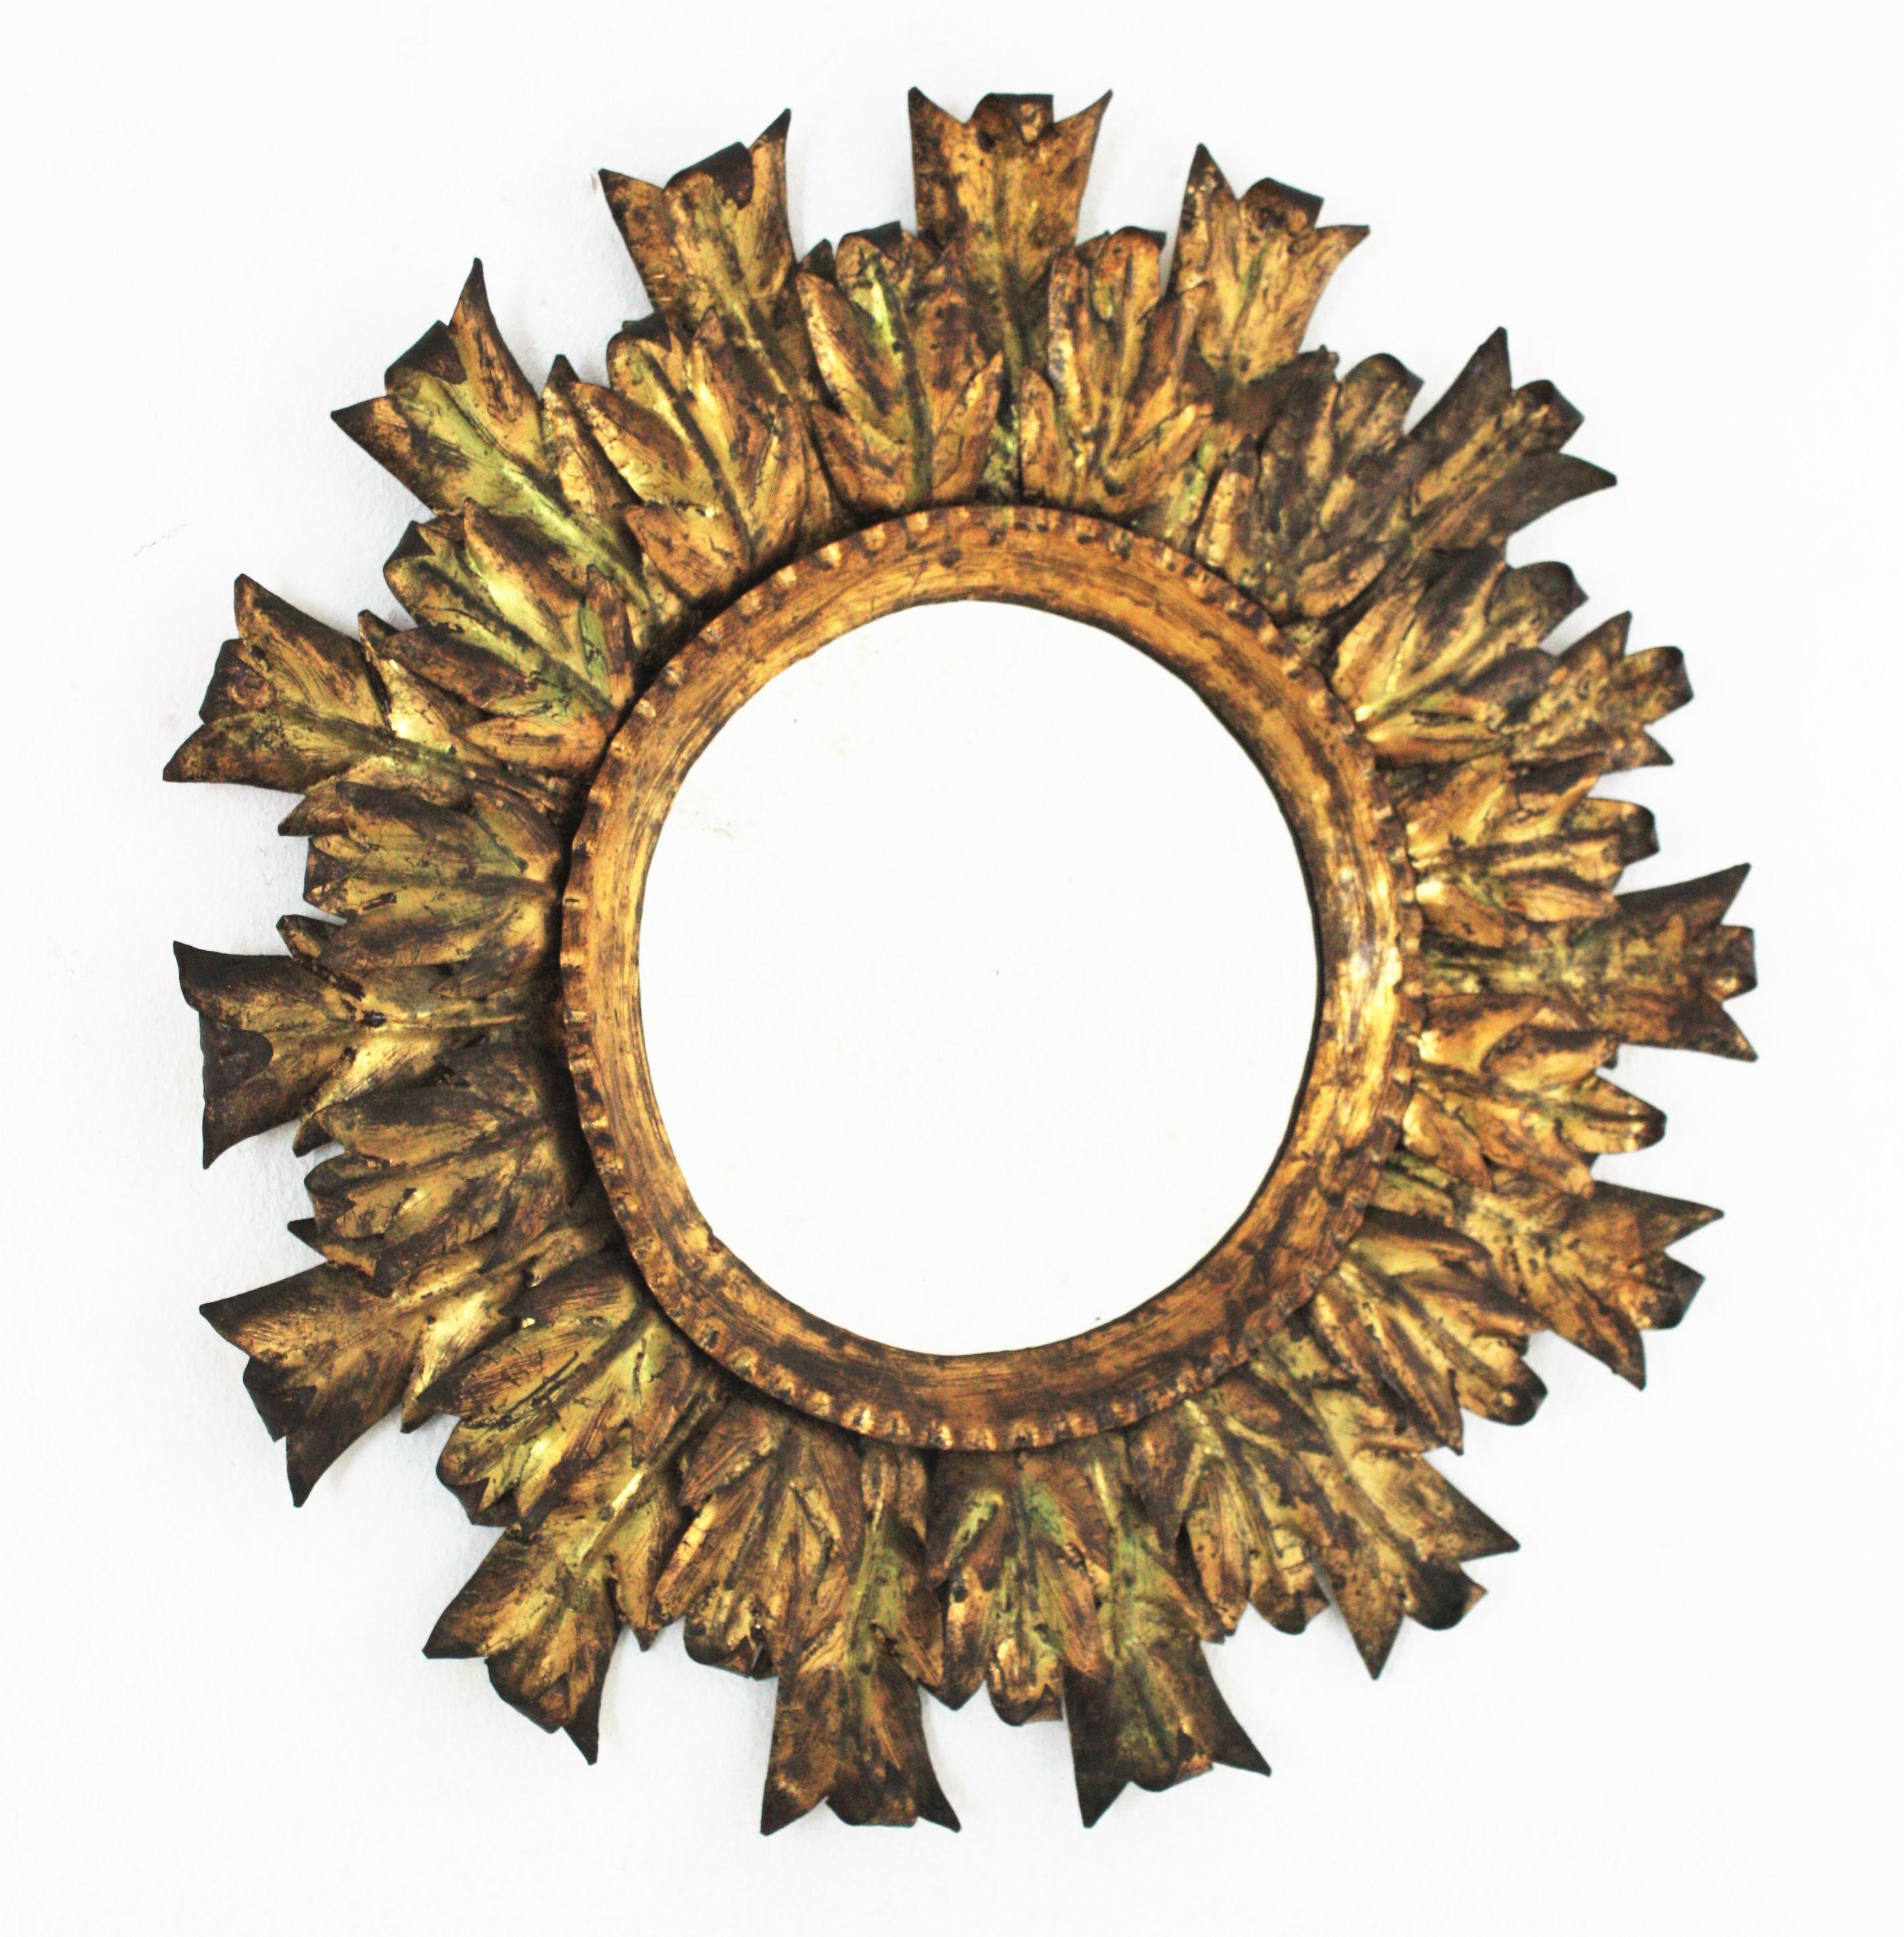 Gilt metal leafed sunburst mirror, Spain, 1940s-1950s.
This handcrafted Brutalist wall mirror features two layers of alternating leaves in different sizes surrounding a central round glass. It has a terrific aged patina with gold leaf finish and